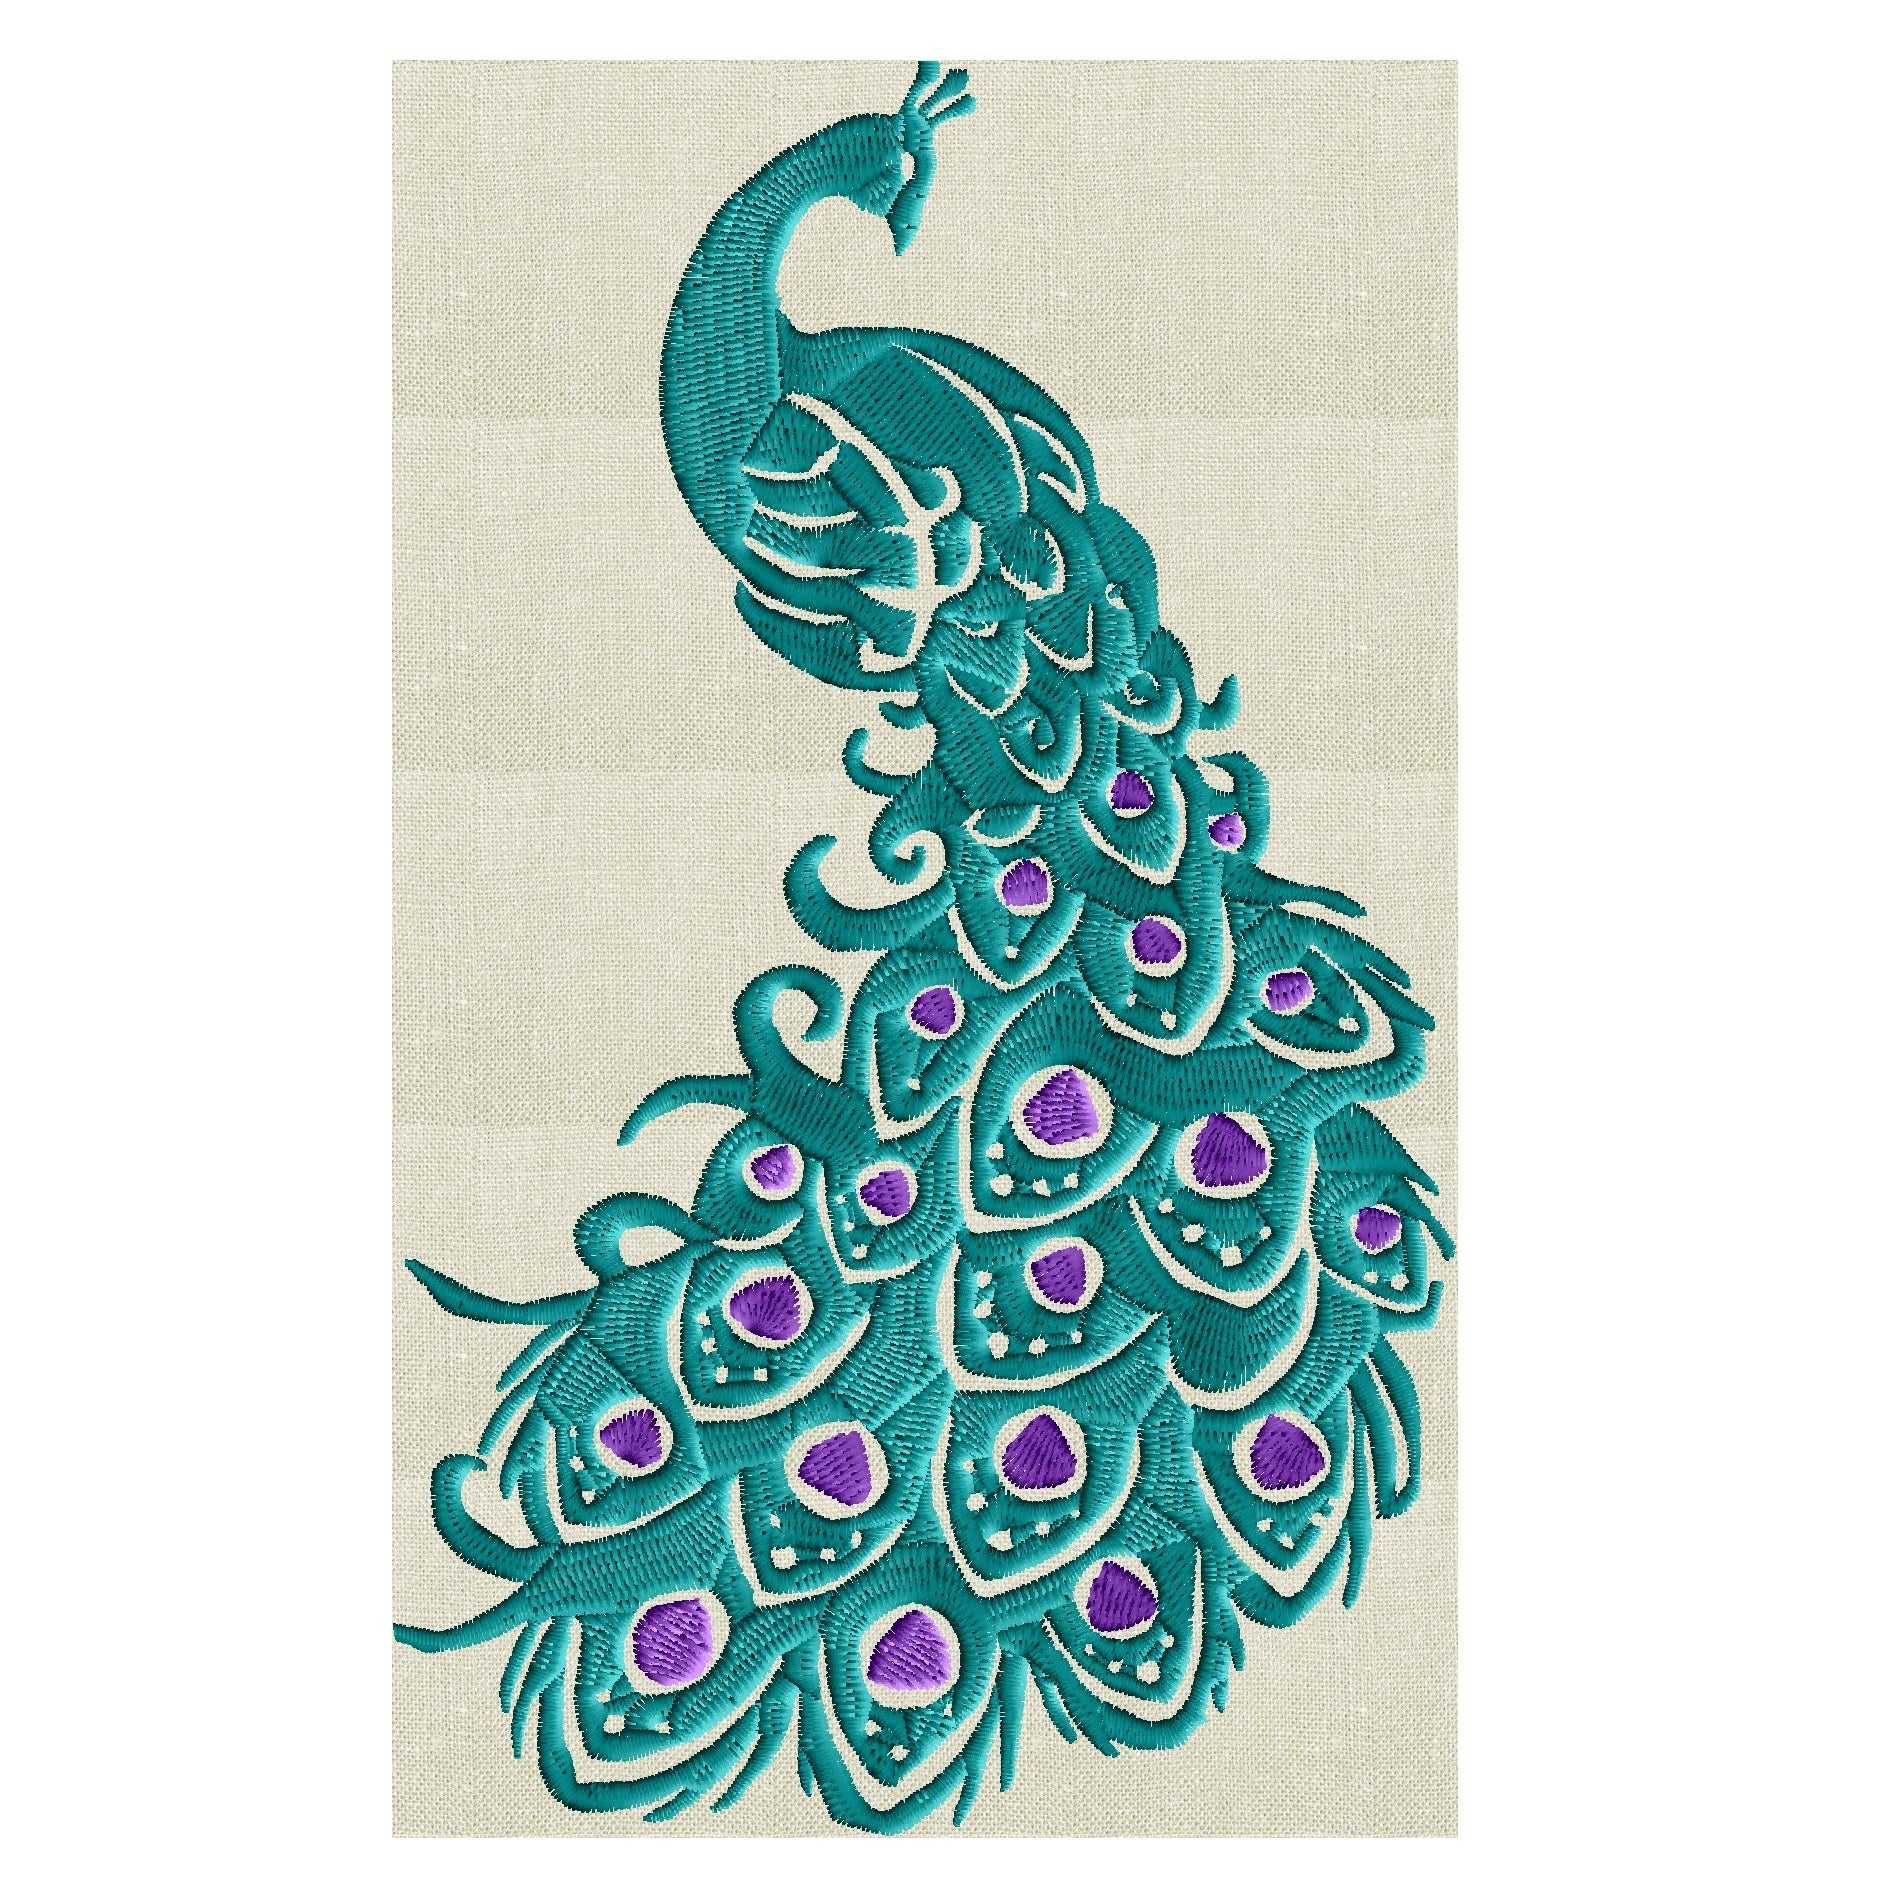 Embroidery Designs Peacock: Celebrating the Majestic Bird with ...